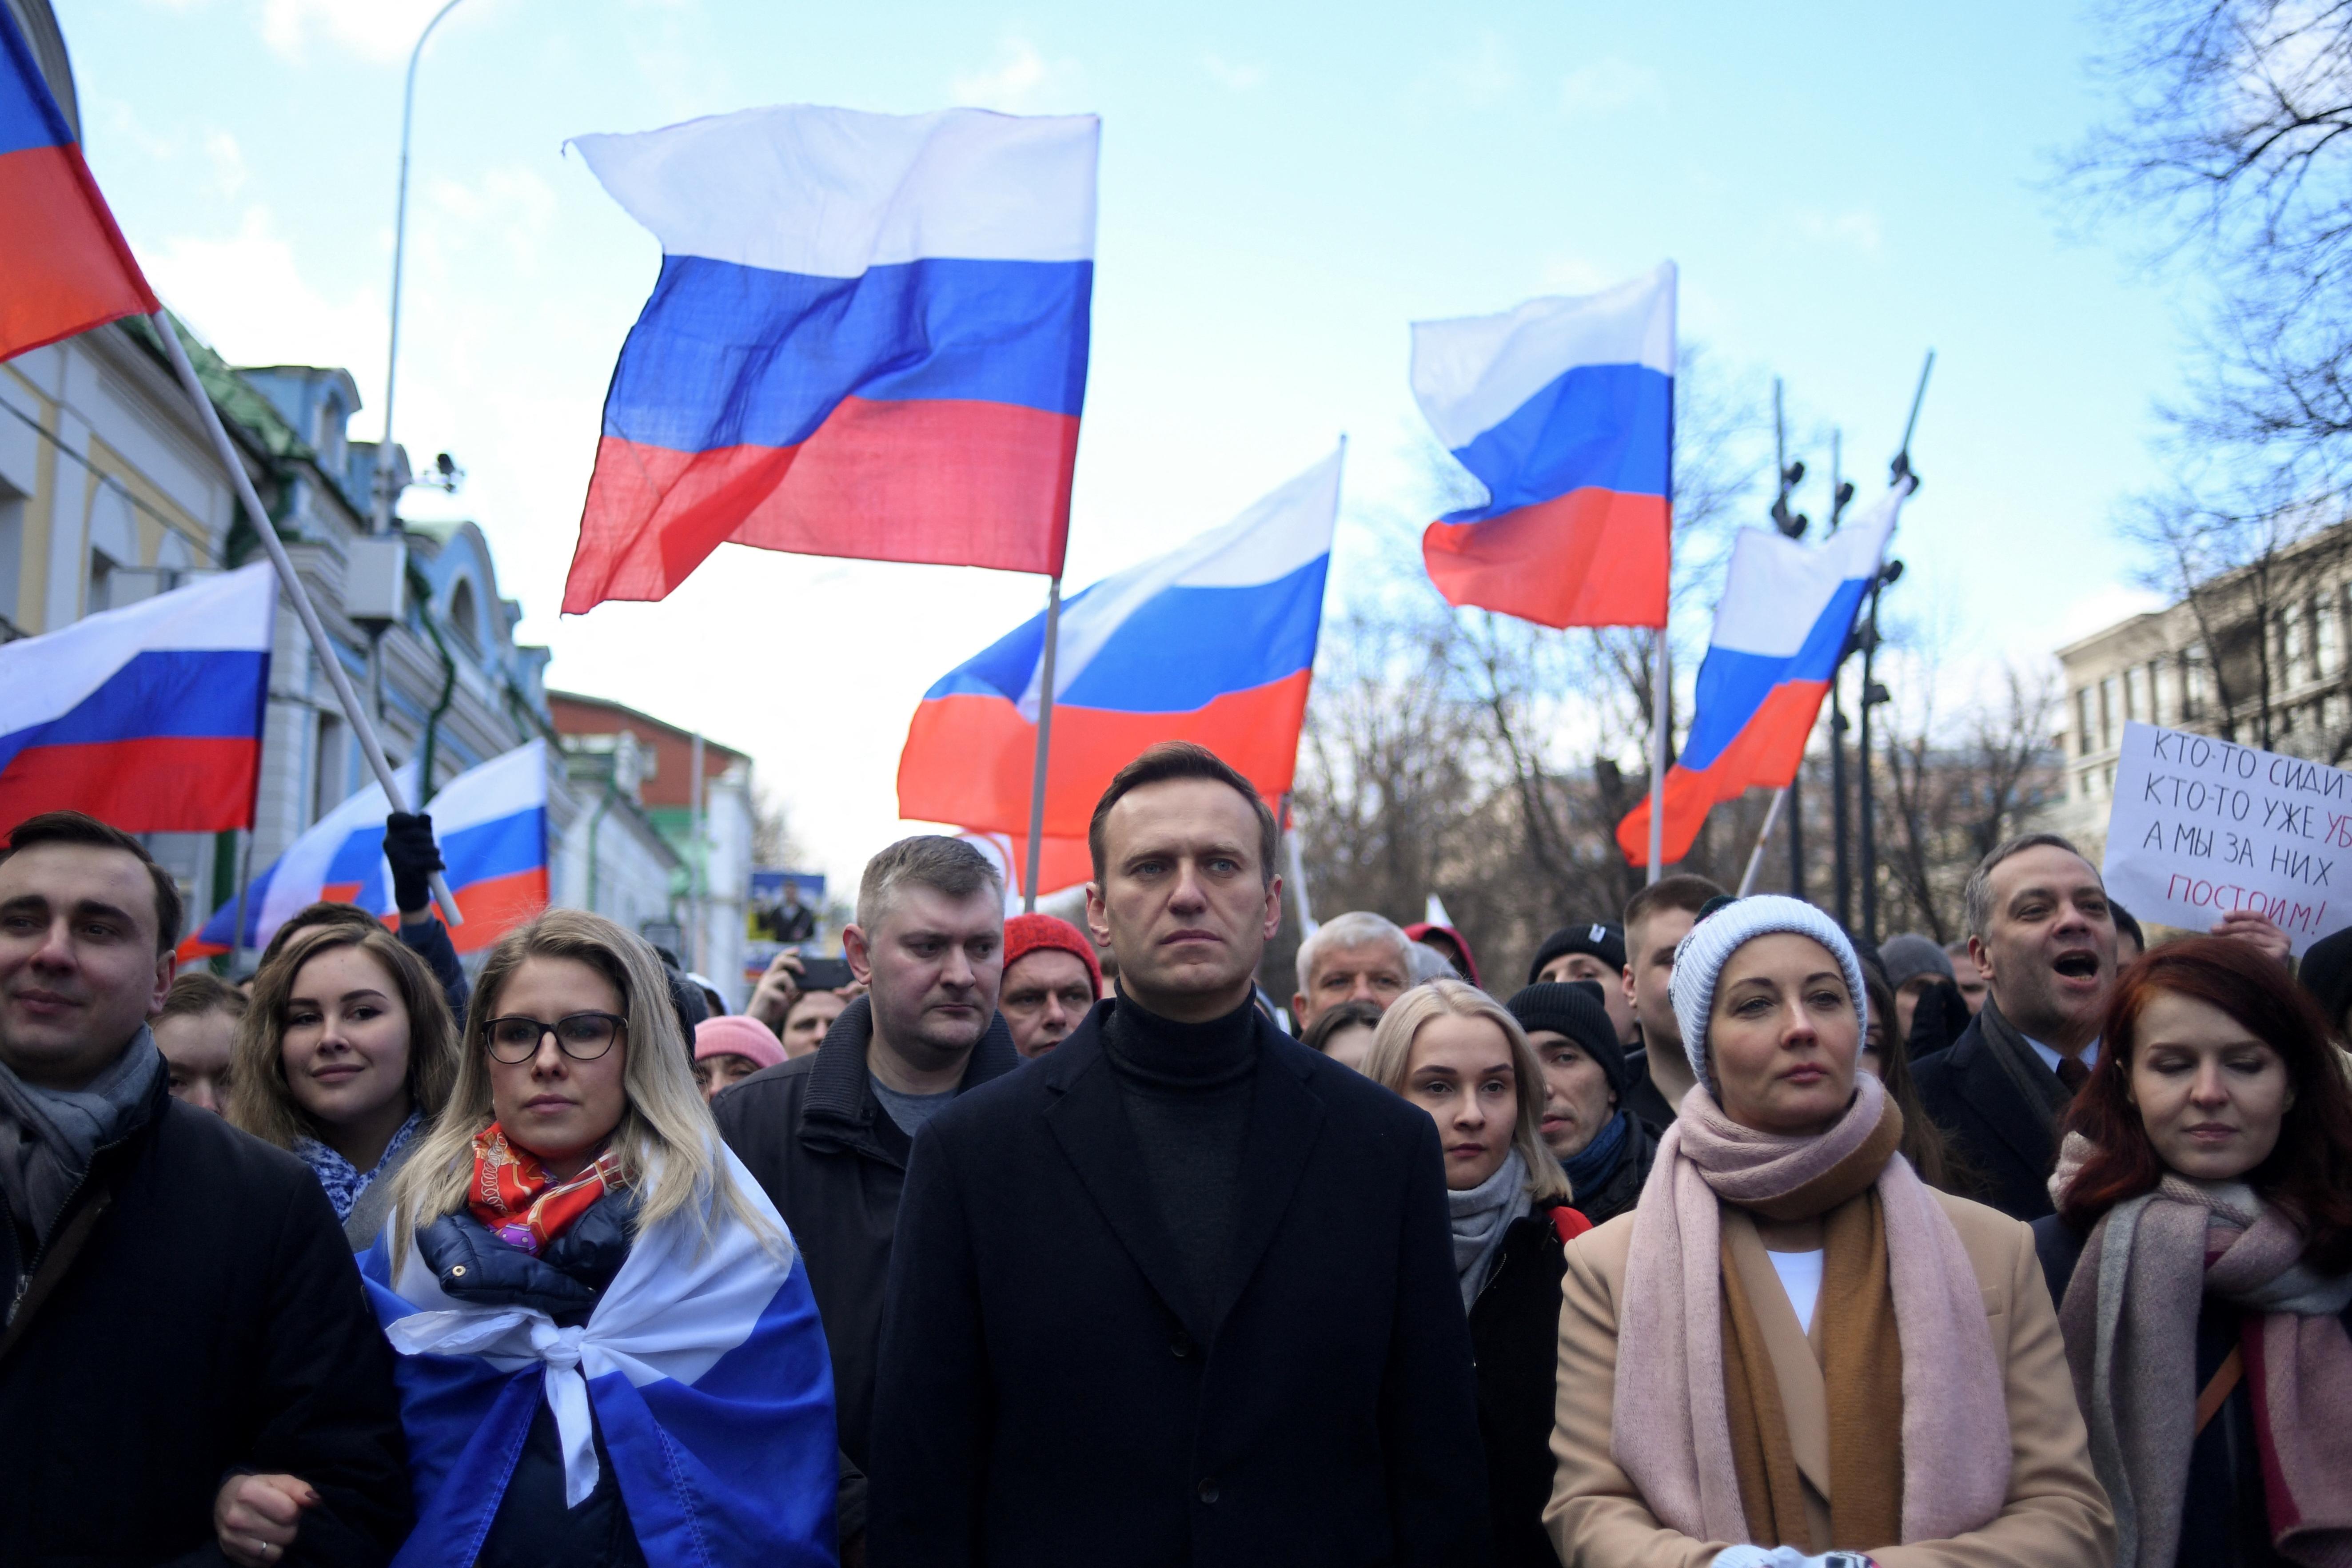 A crowd of people marching, with Russian flags waving above their heads.